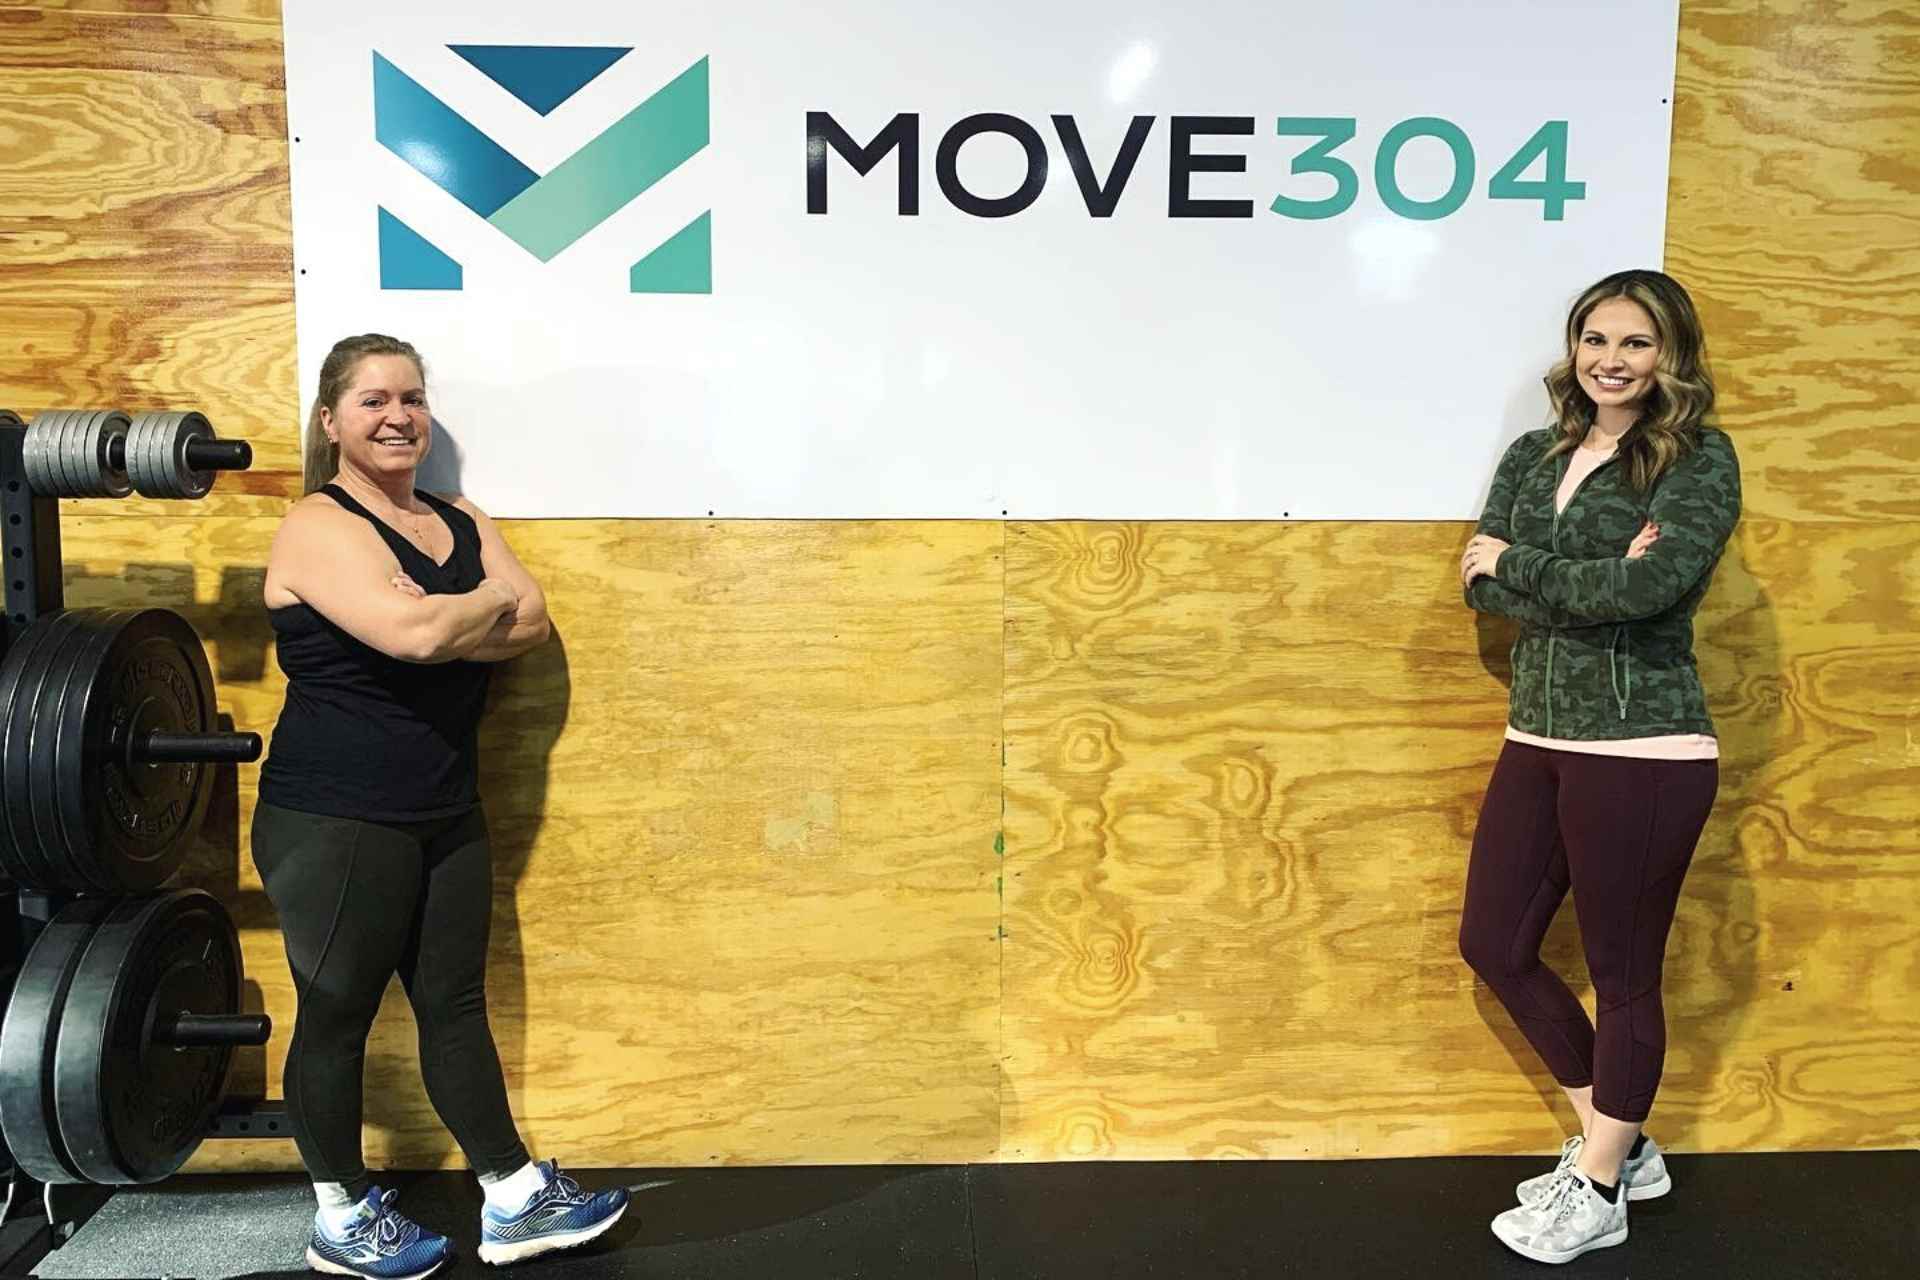 Coach Mae and Coach Courtney will lead the beginner-friendly MOVE 304 Foundations Program, which kicks off March 22.